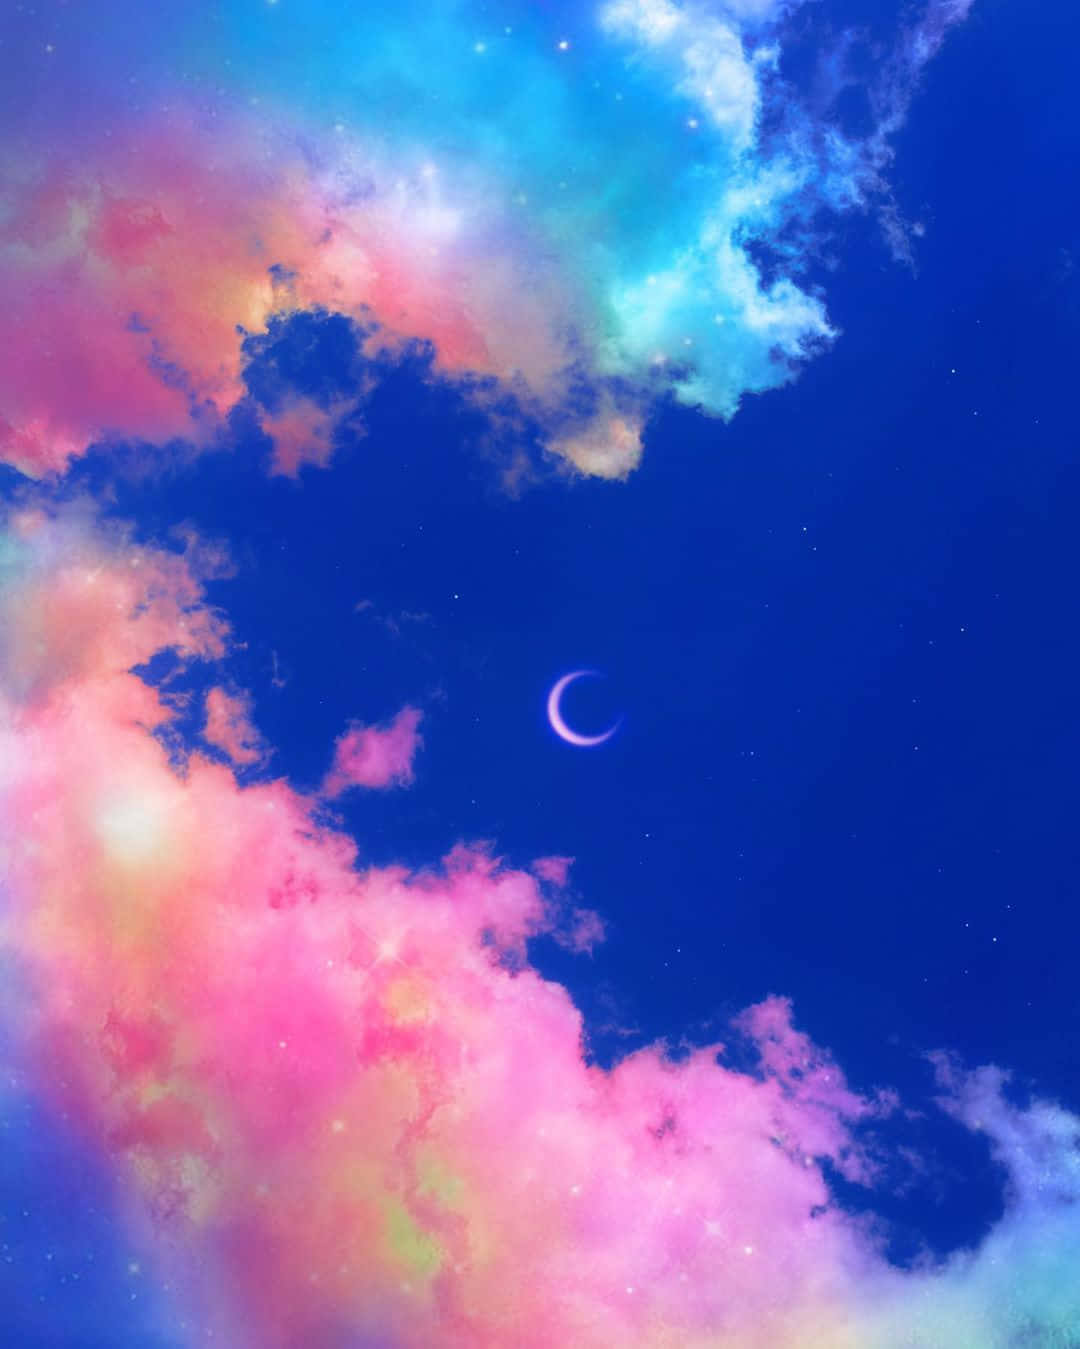 Colorful Trippy Aesthetic Cloud With Crescent Moon Wallpaper